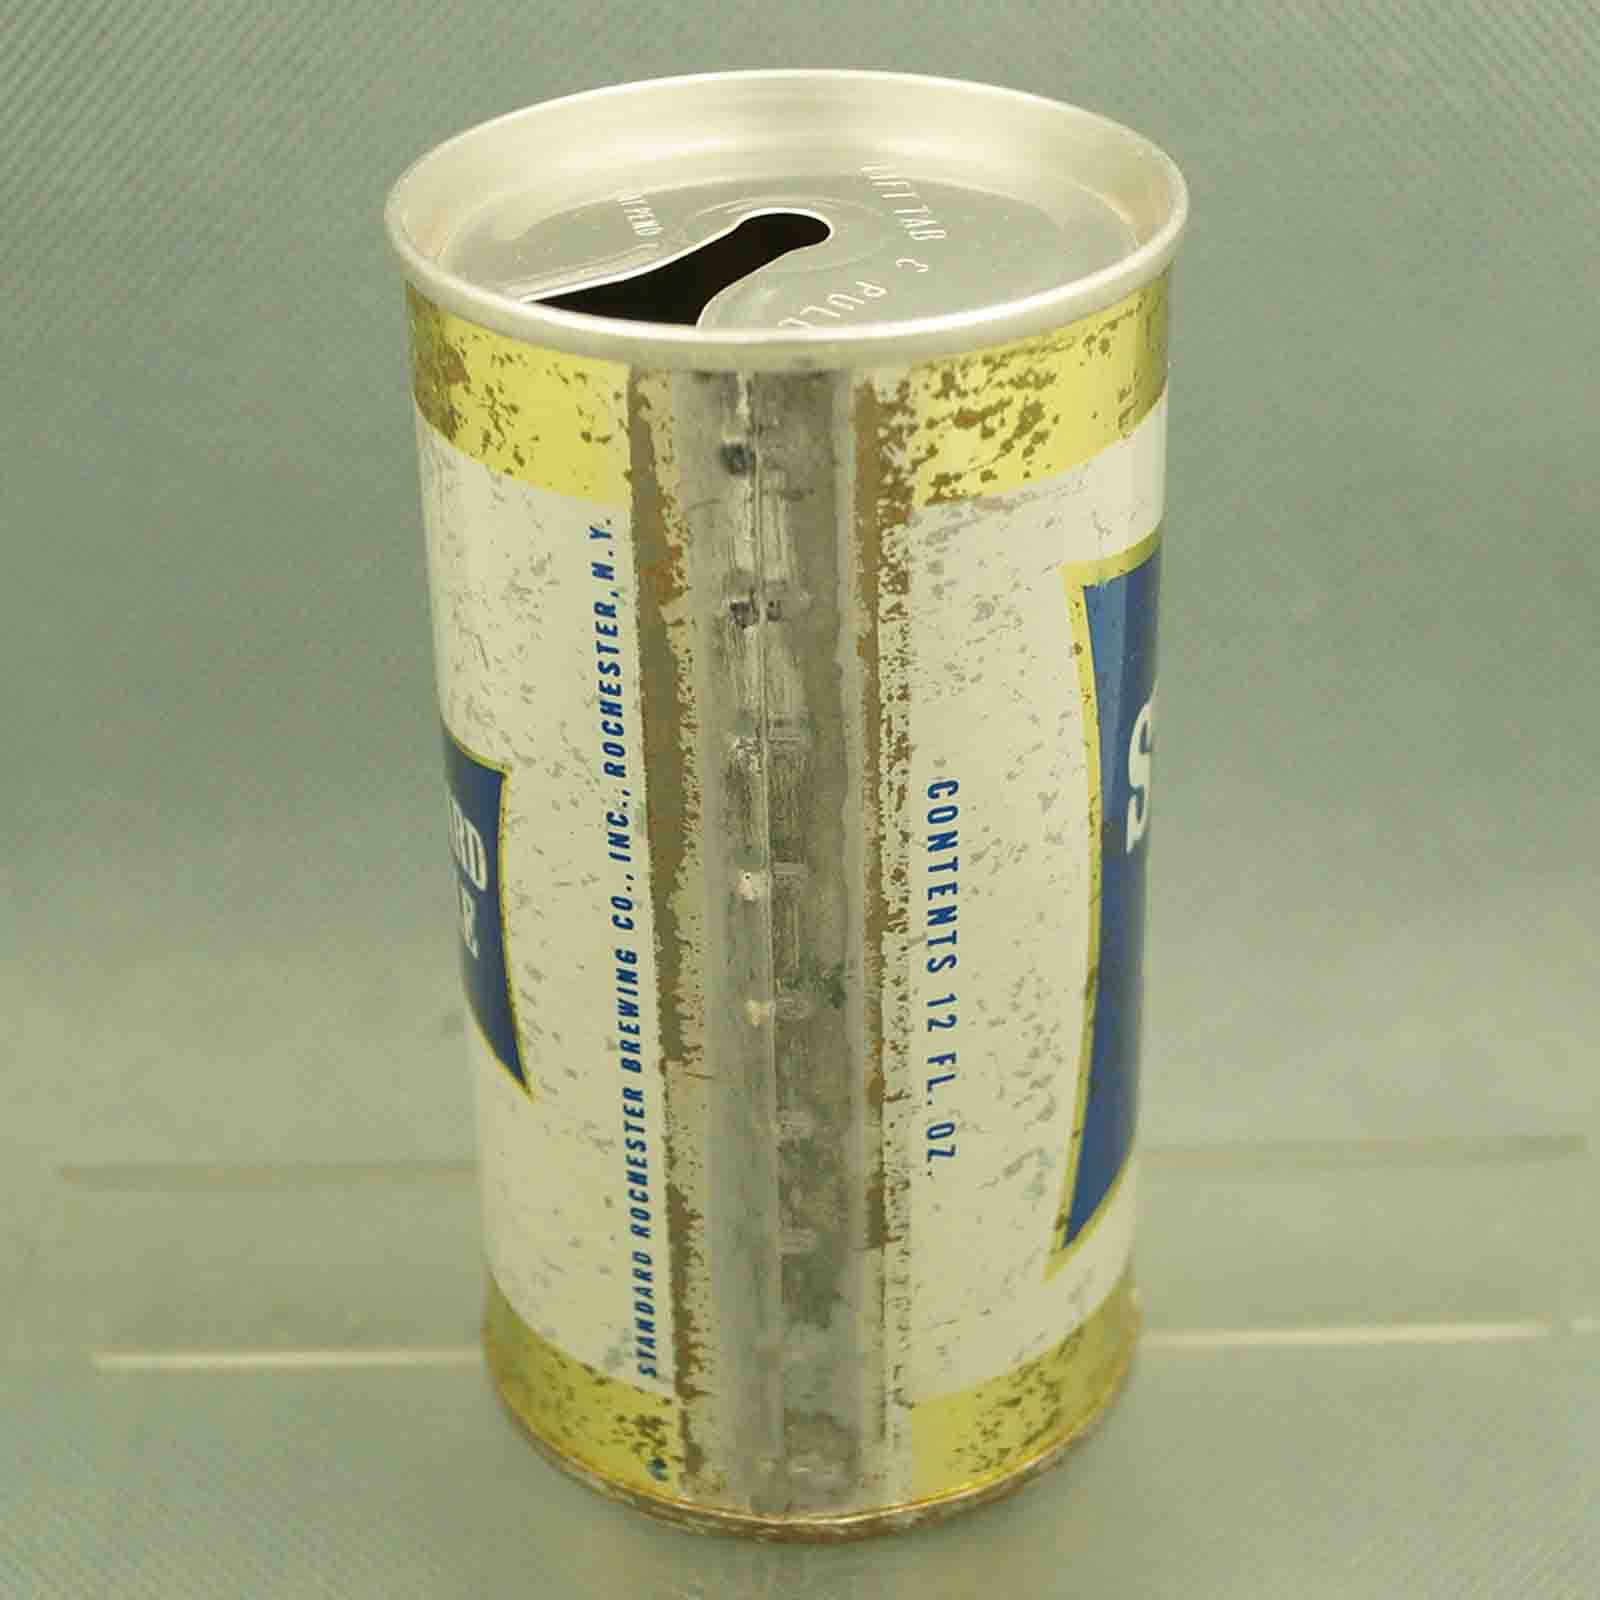 standard dry 126-7 pull tab beer can 3